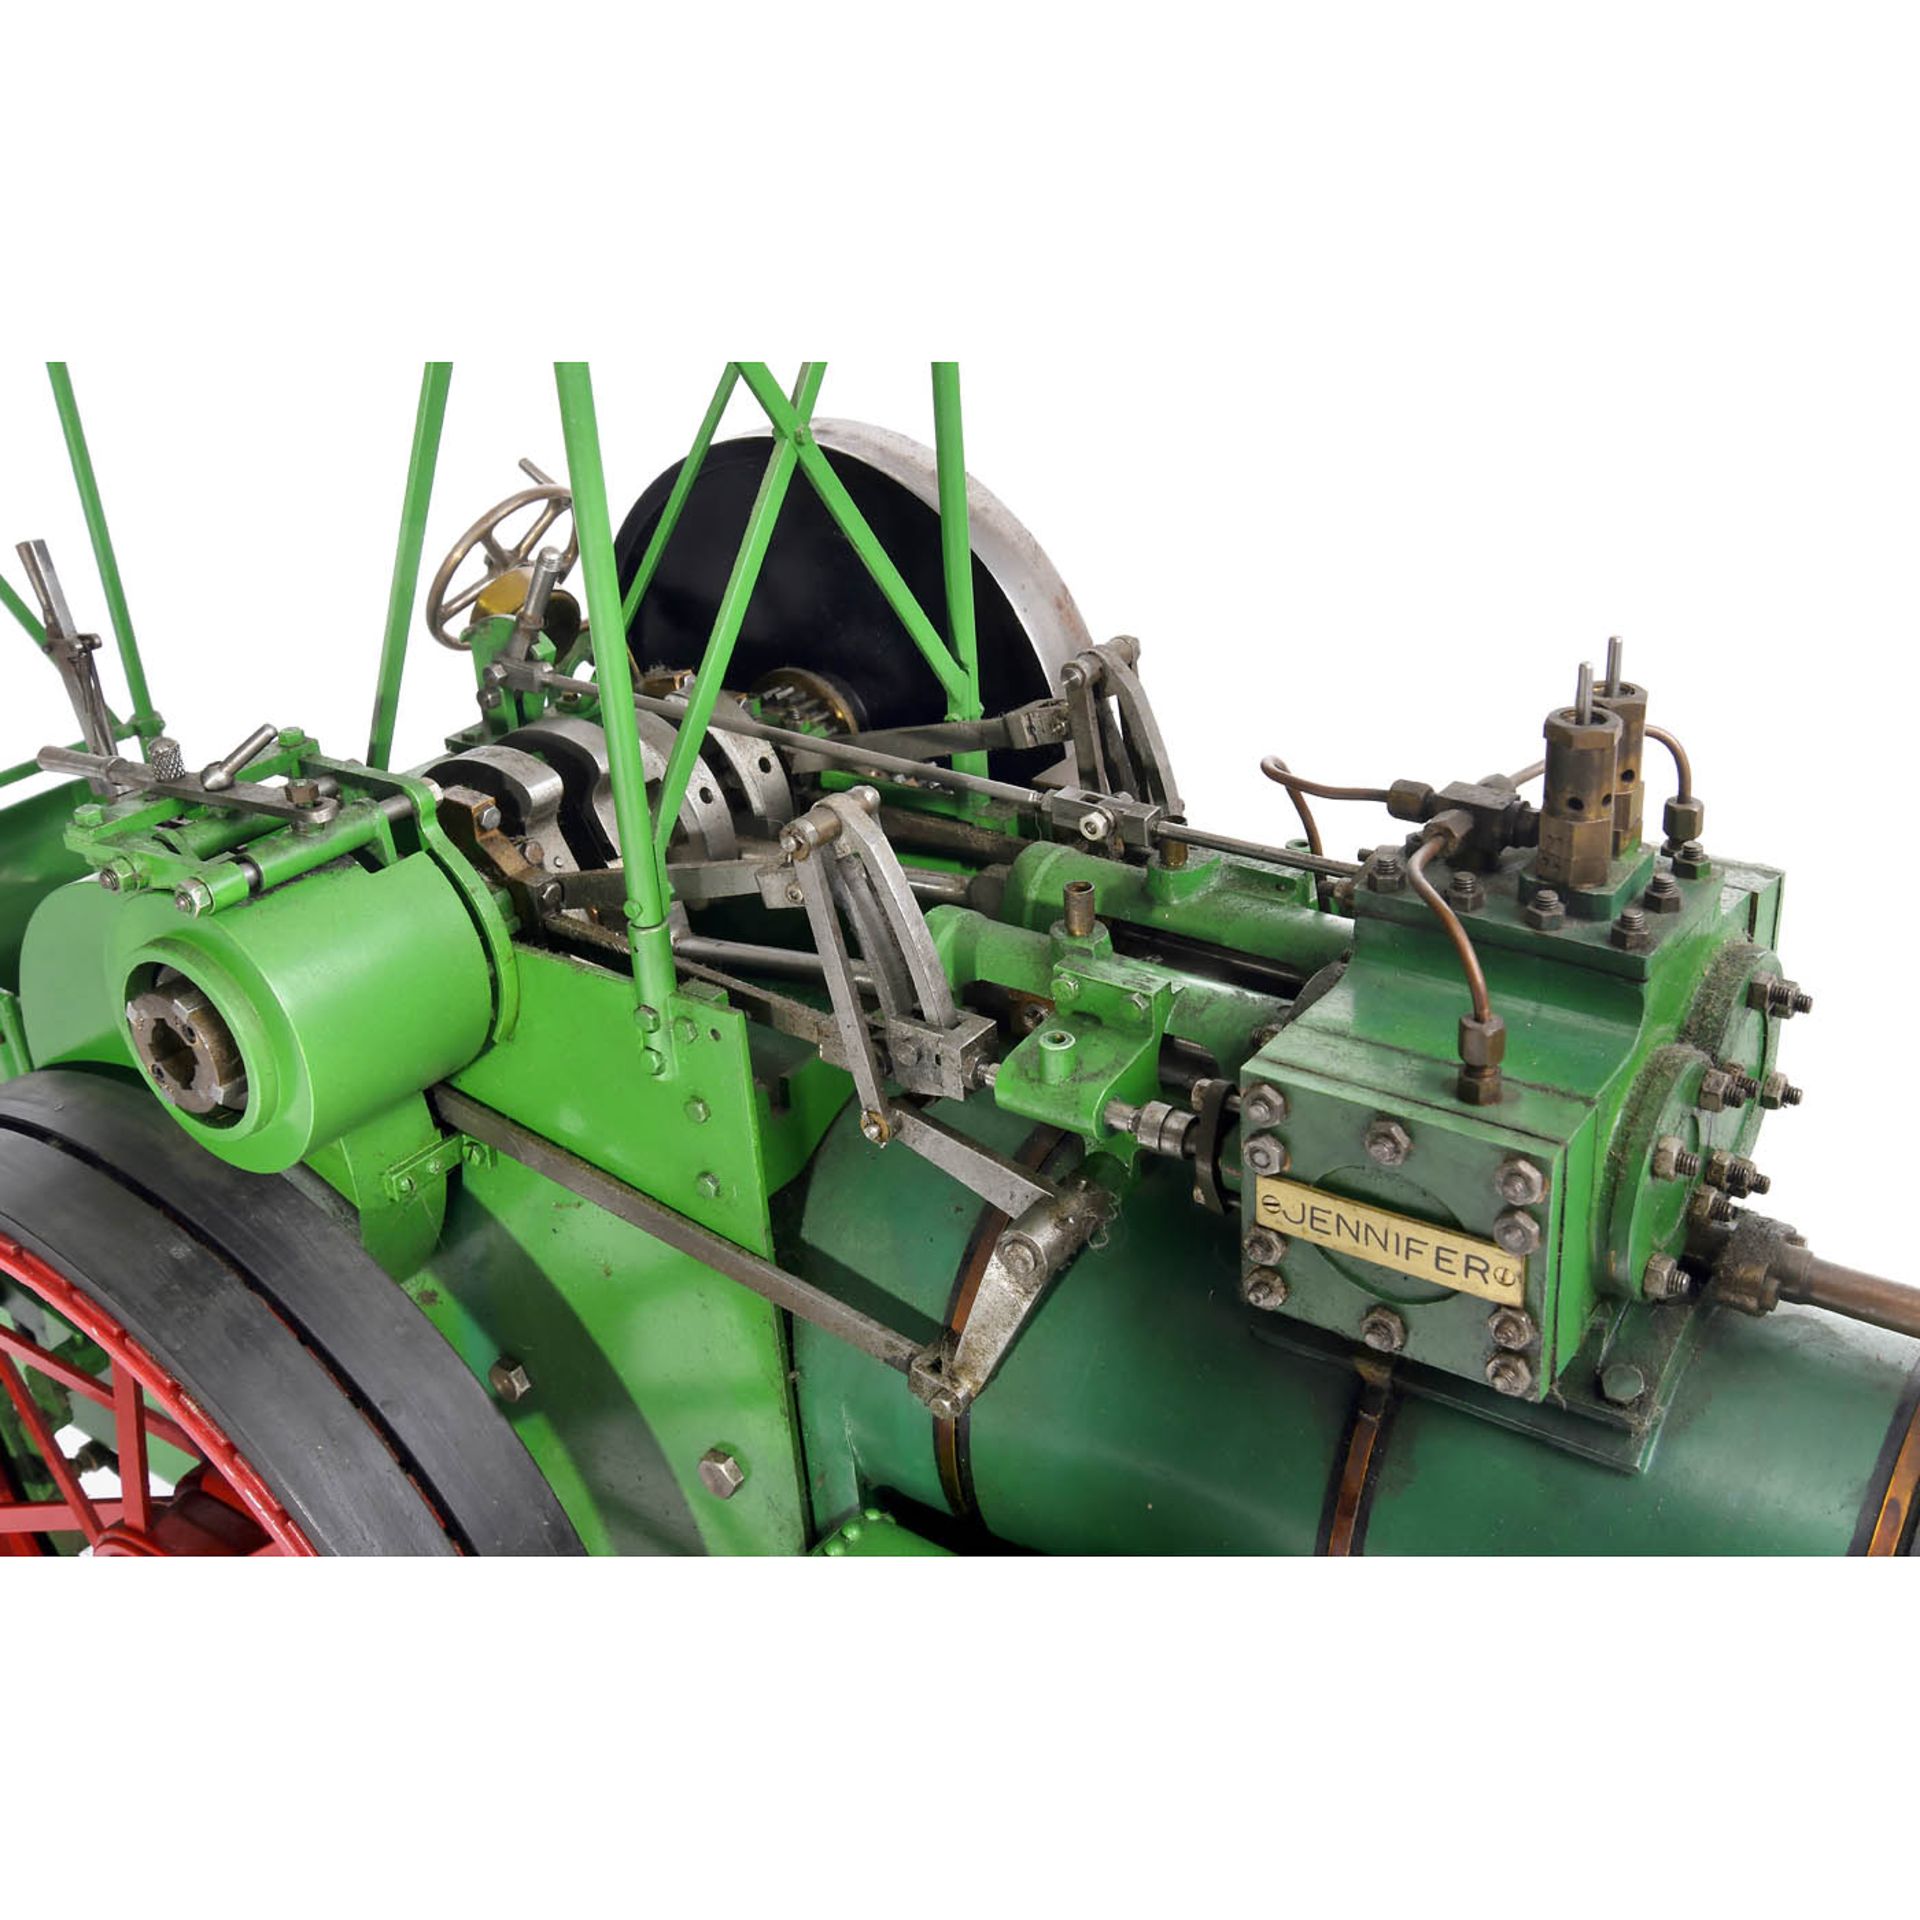 2-inch Scale Model of a Live-Steam Traction Engine "Jenifer", c. 1984 - Image 7 of 10